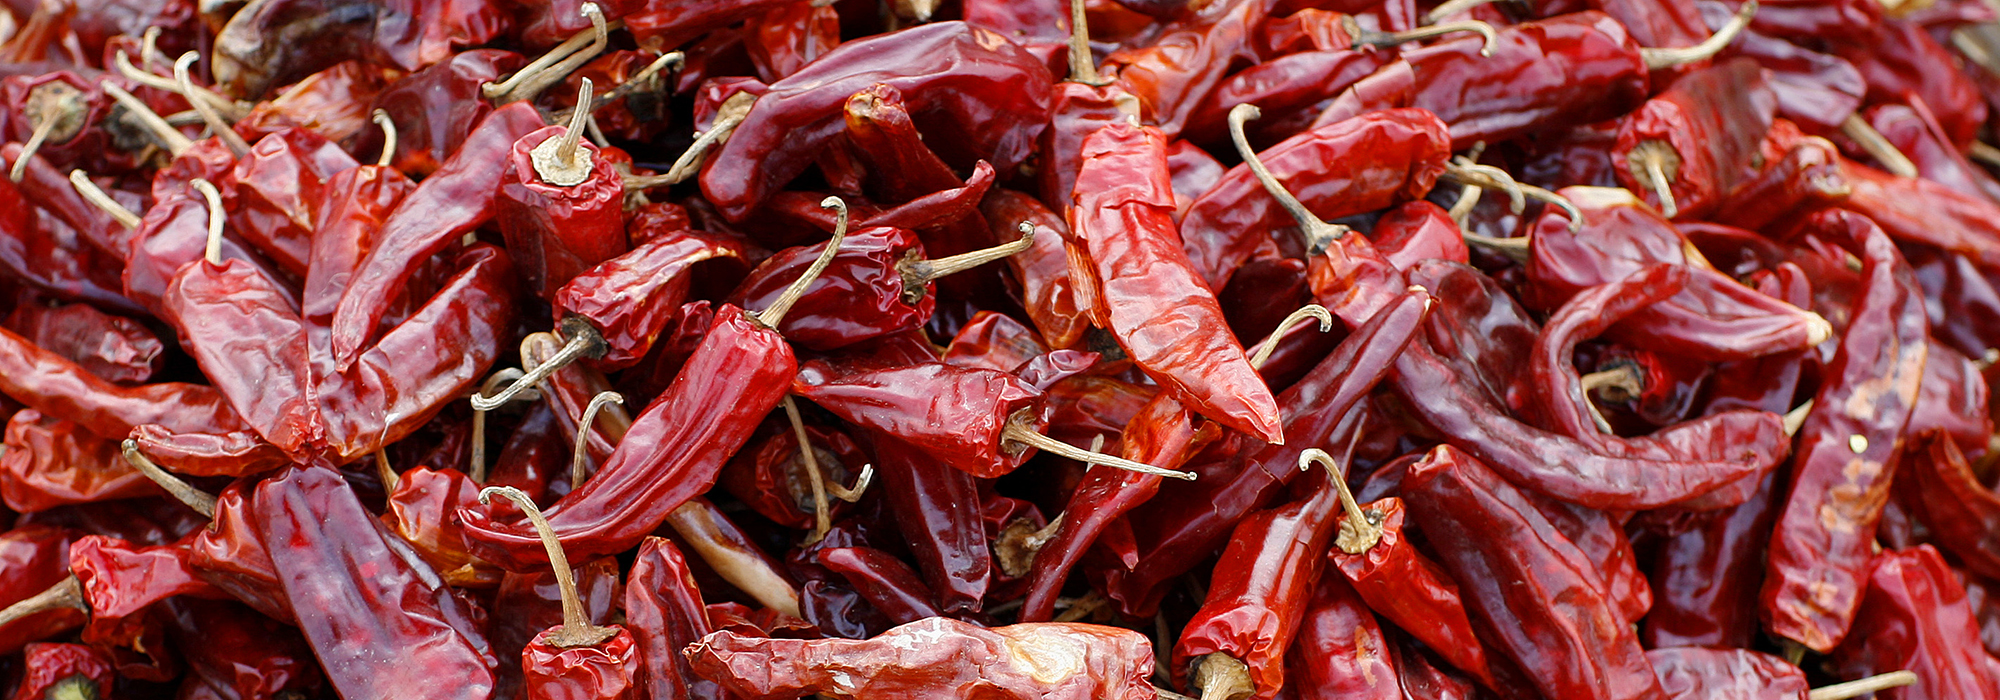 Red-Chilies-DRY-pic